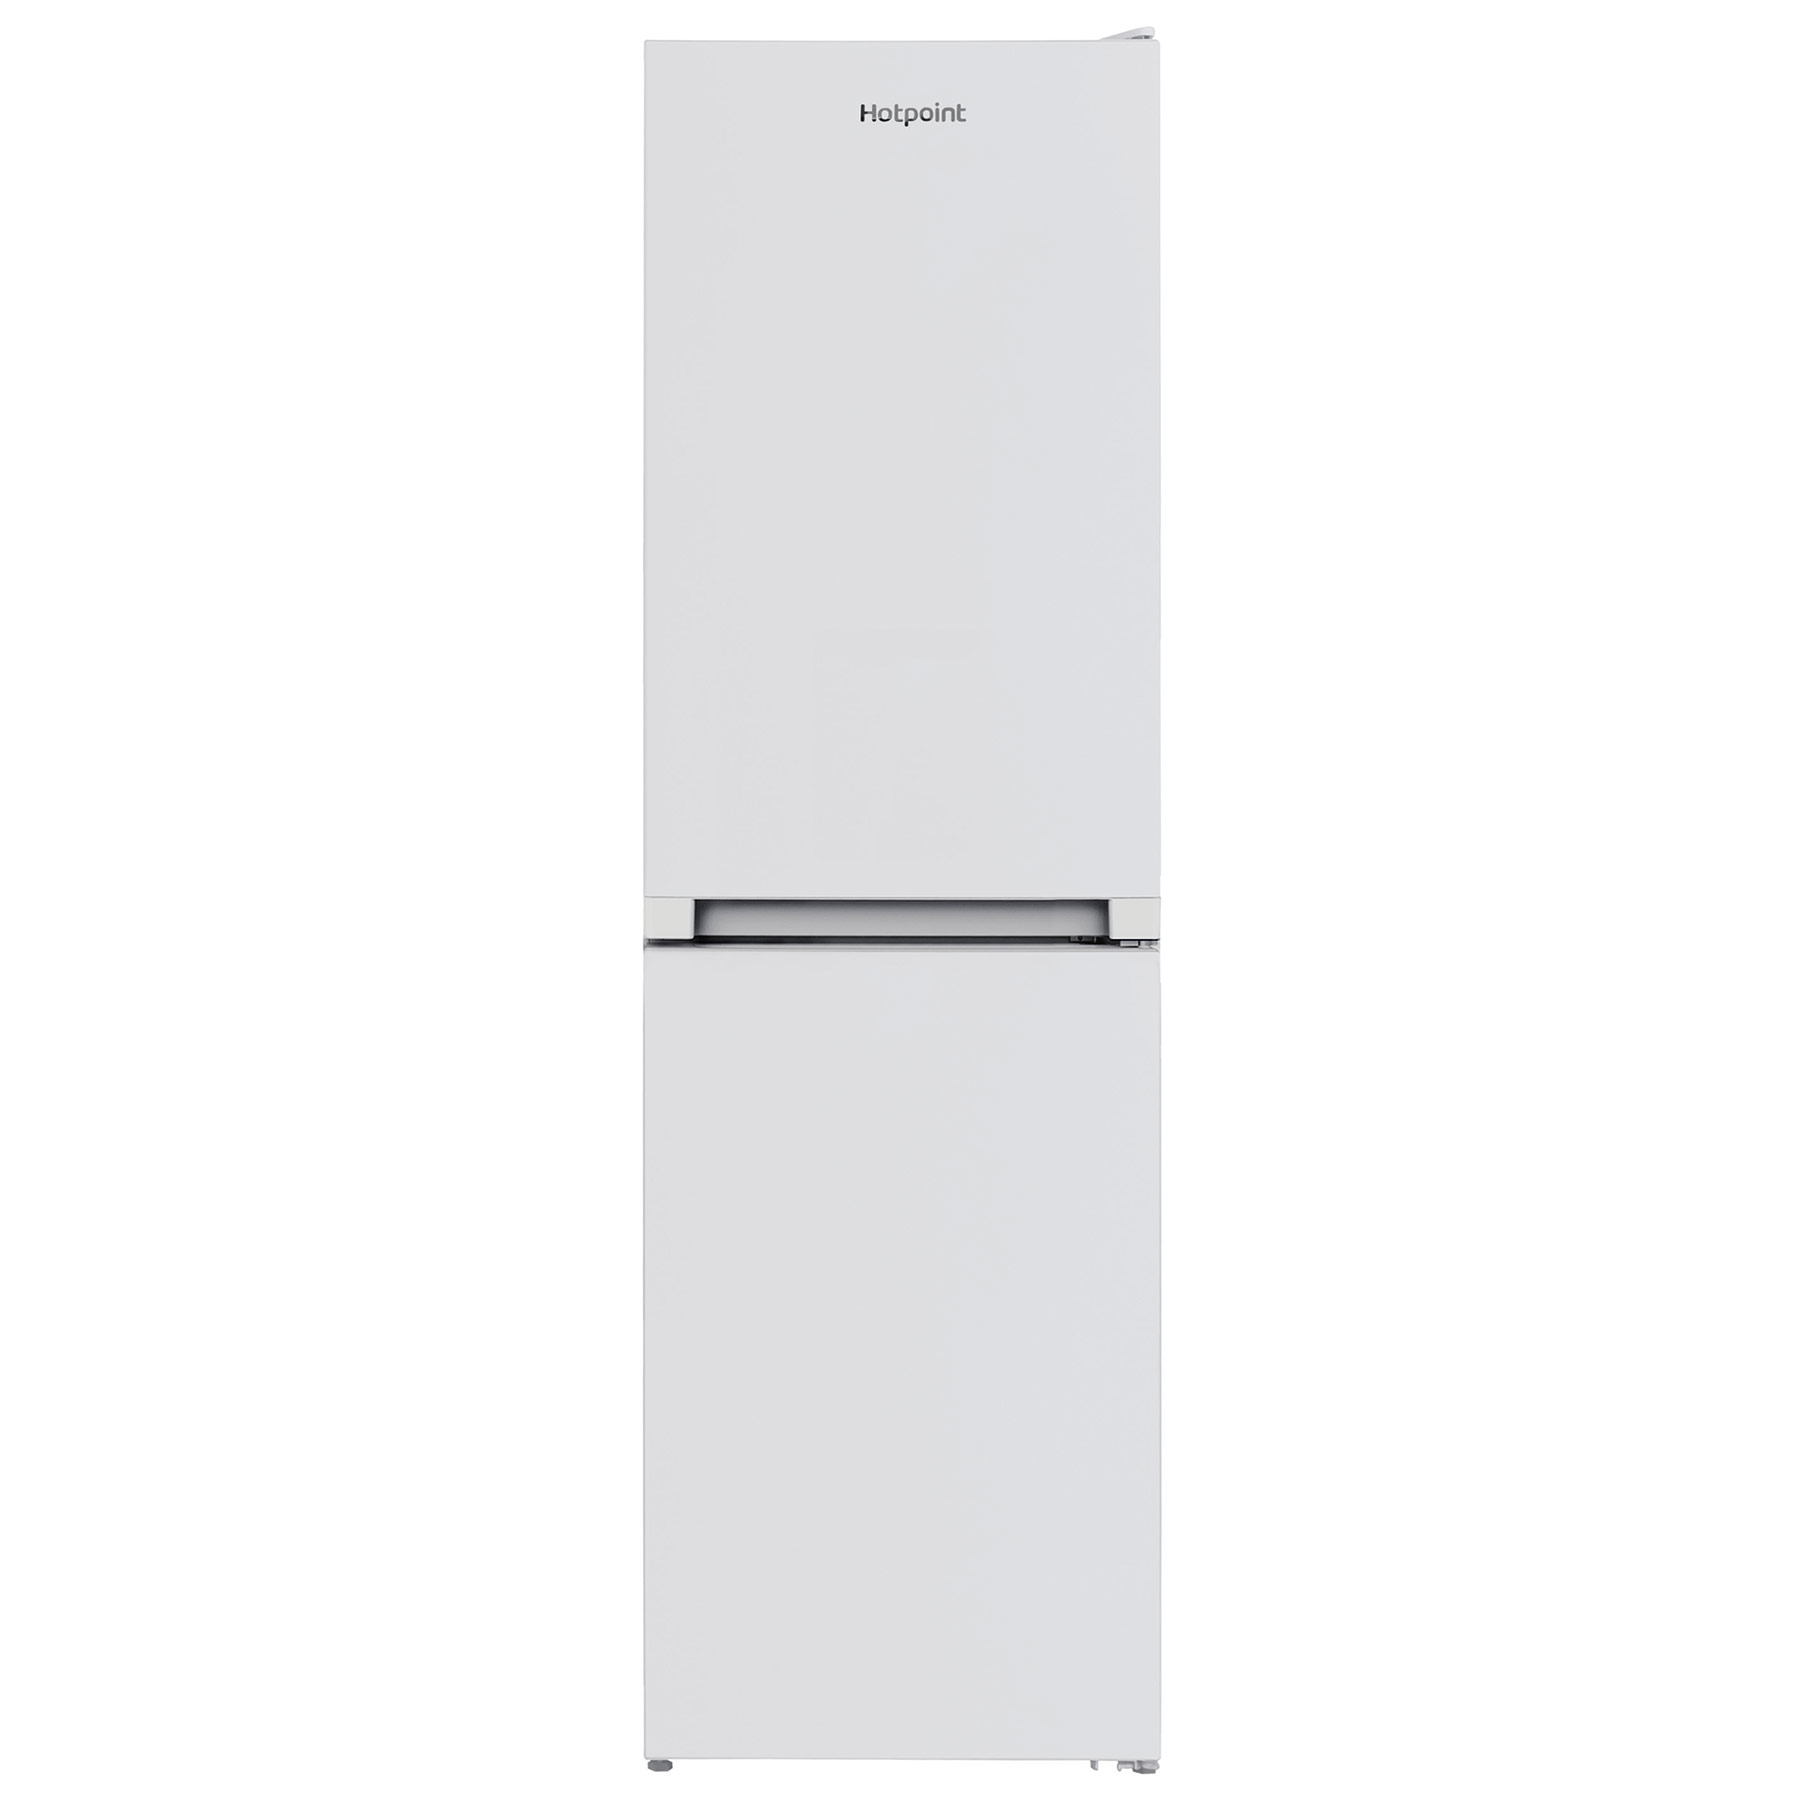 Image of Hotpoint HBNF55182WUK 54cm Frost Free Fridge Freezer in White 1 83m E